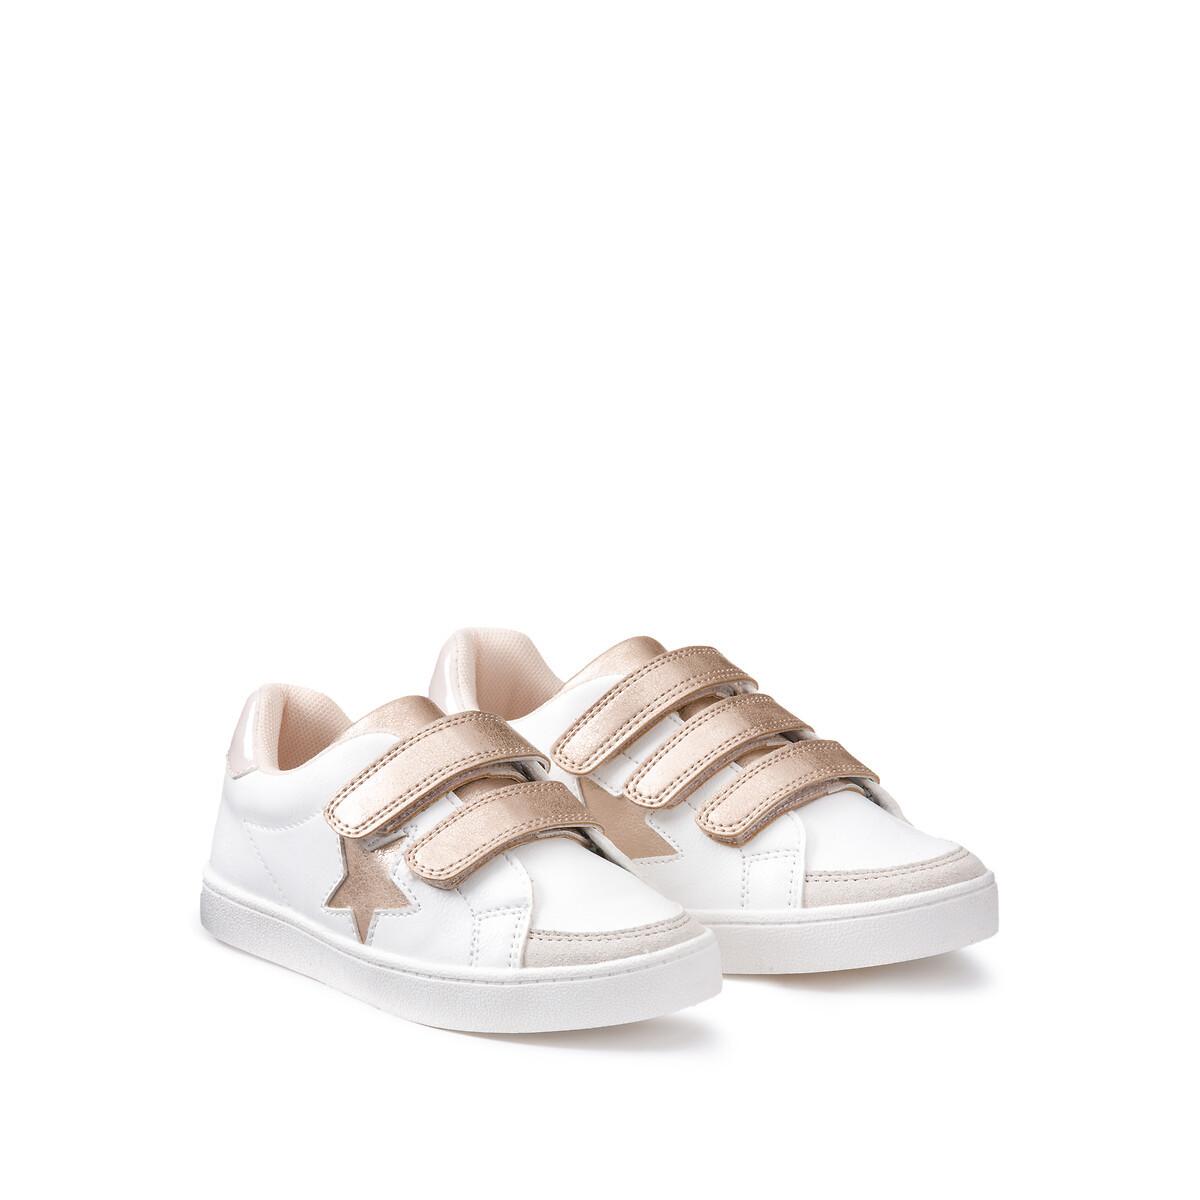 La Redoute Collections  Flache Sneakers mit Sterndetail 